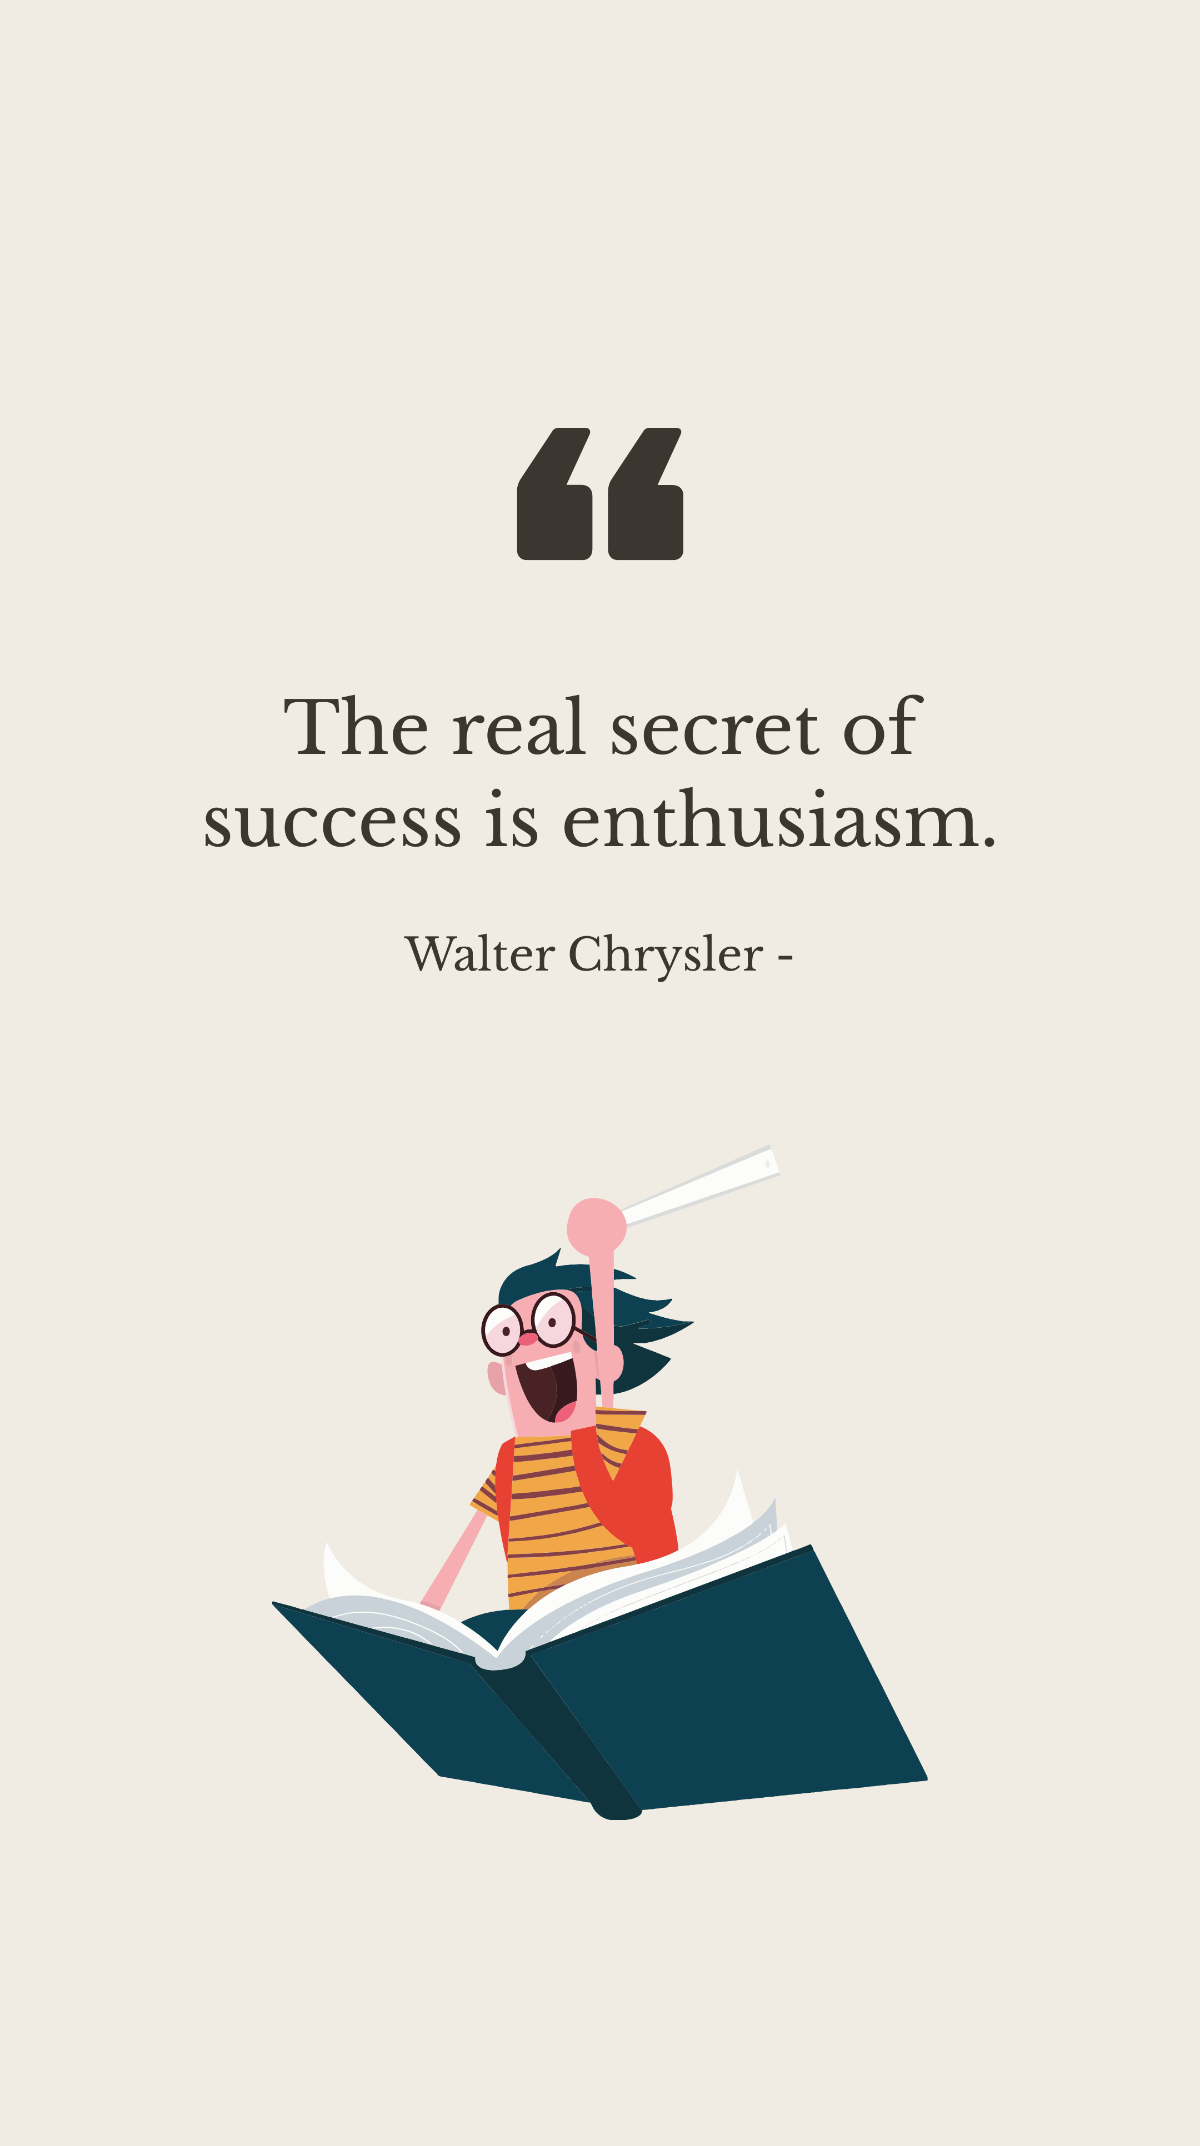 Walter Chrysler - The real secret of success is enthusiasm. Template